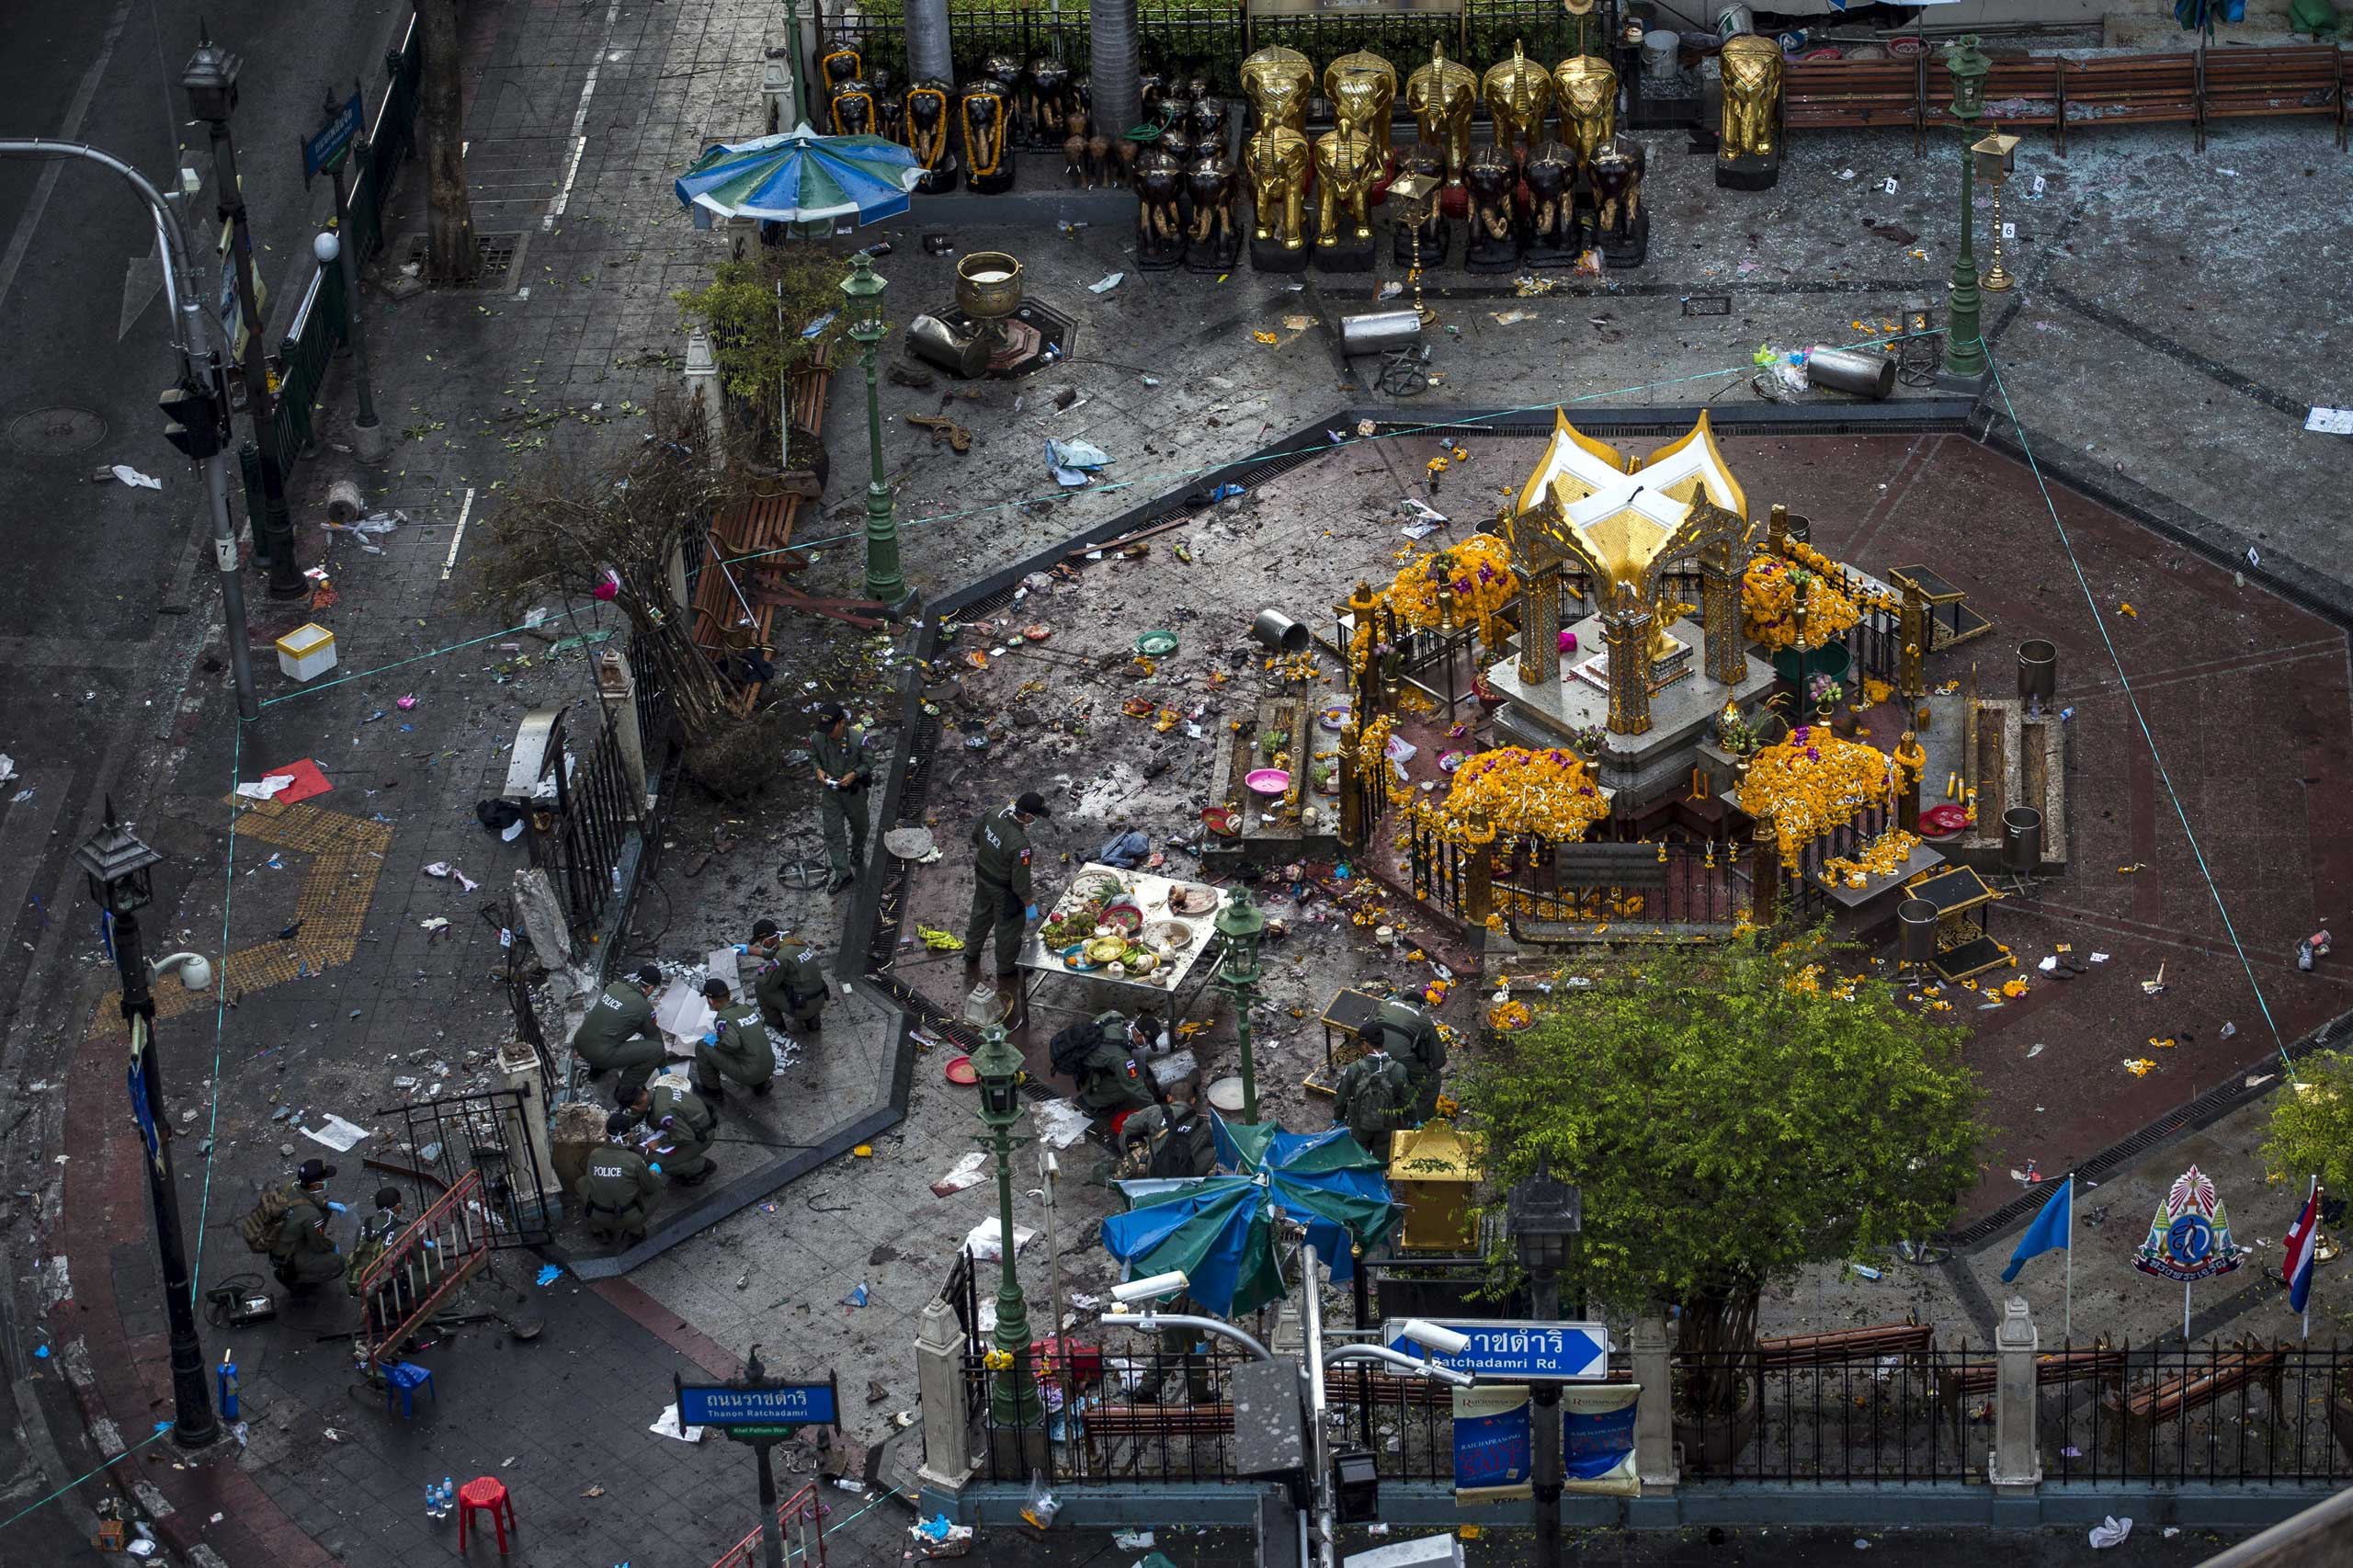 Experts investigate the Erawan shrine at the site of a deadly blast in central Bangkok, on Aug. 18, 2015. (Athit Perawongmetha—Reuters)